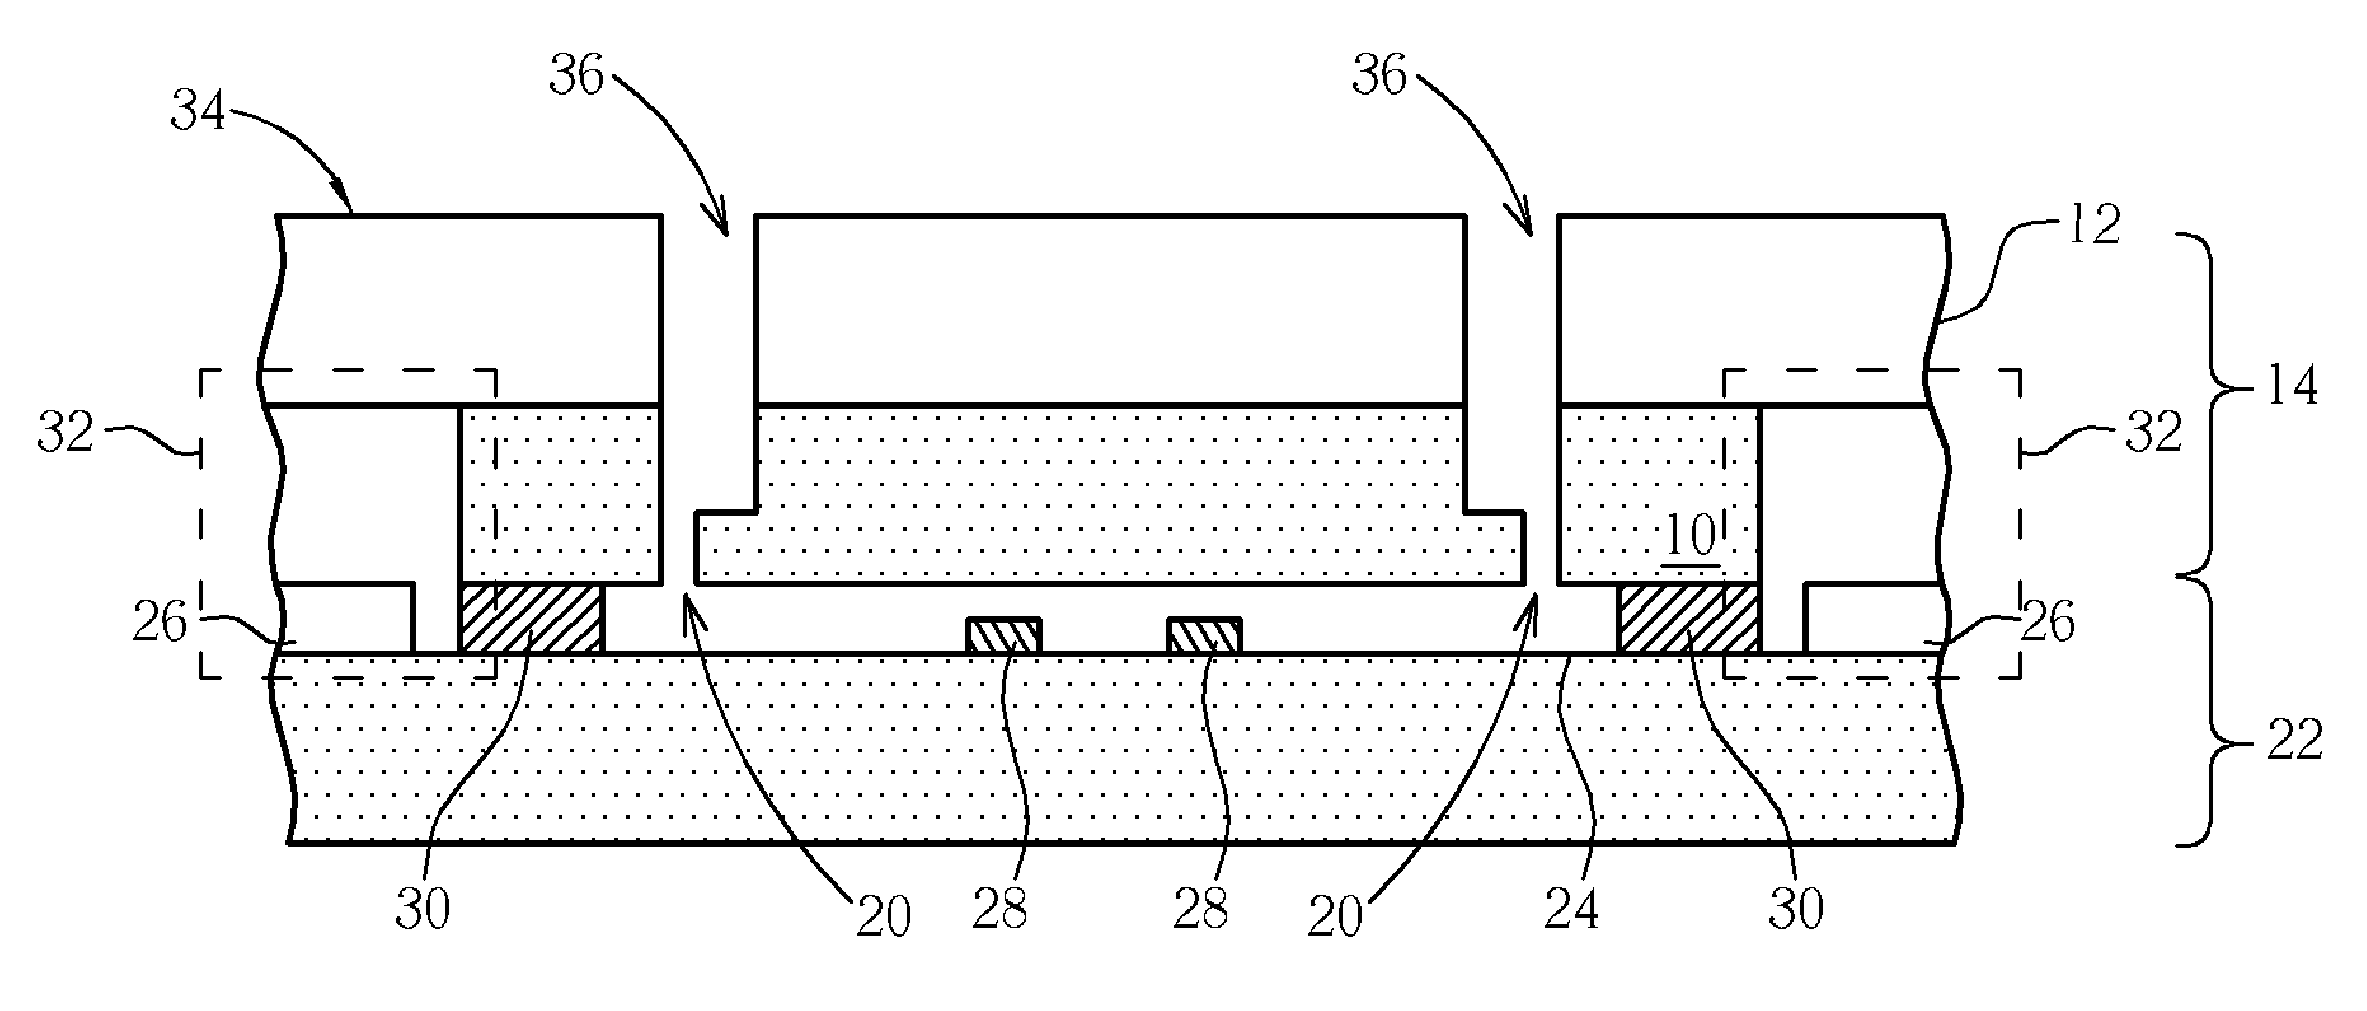 Wafer-level packaging cutting method capable of protecting contact pads